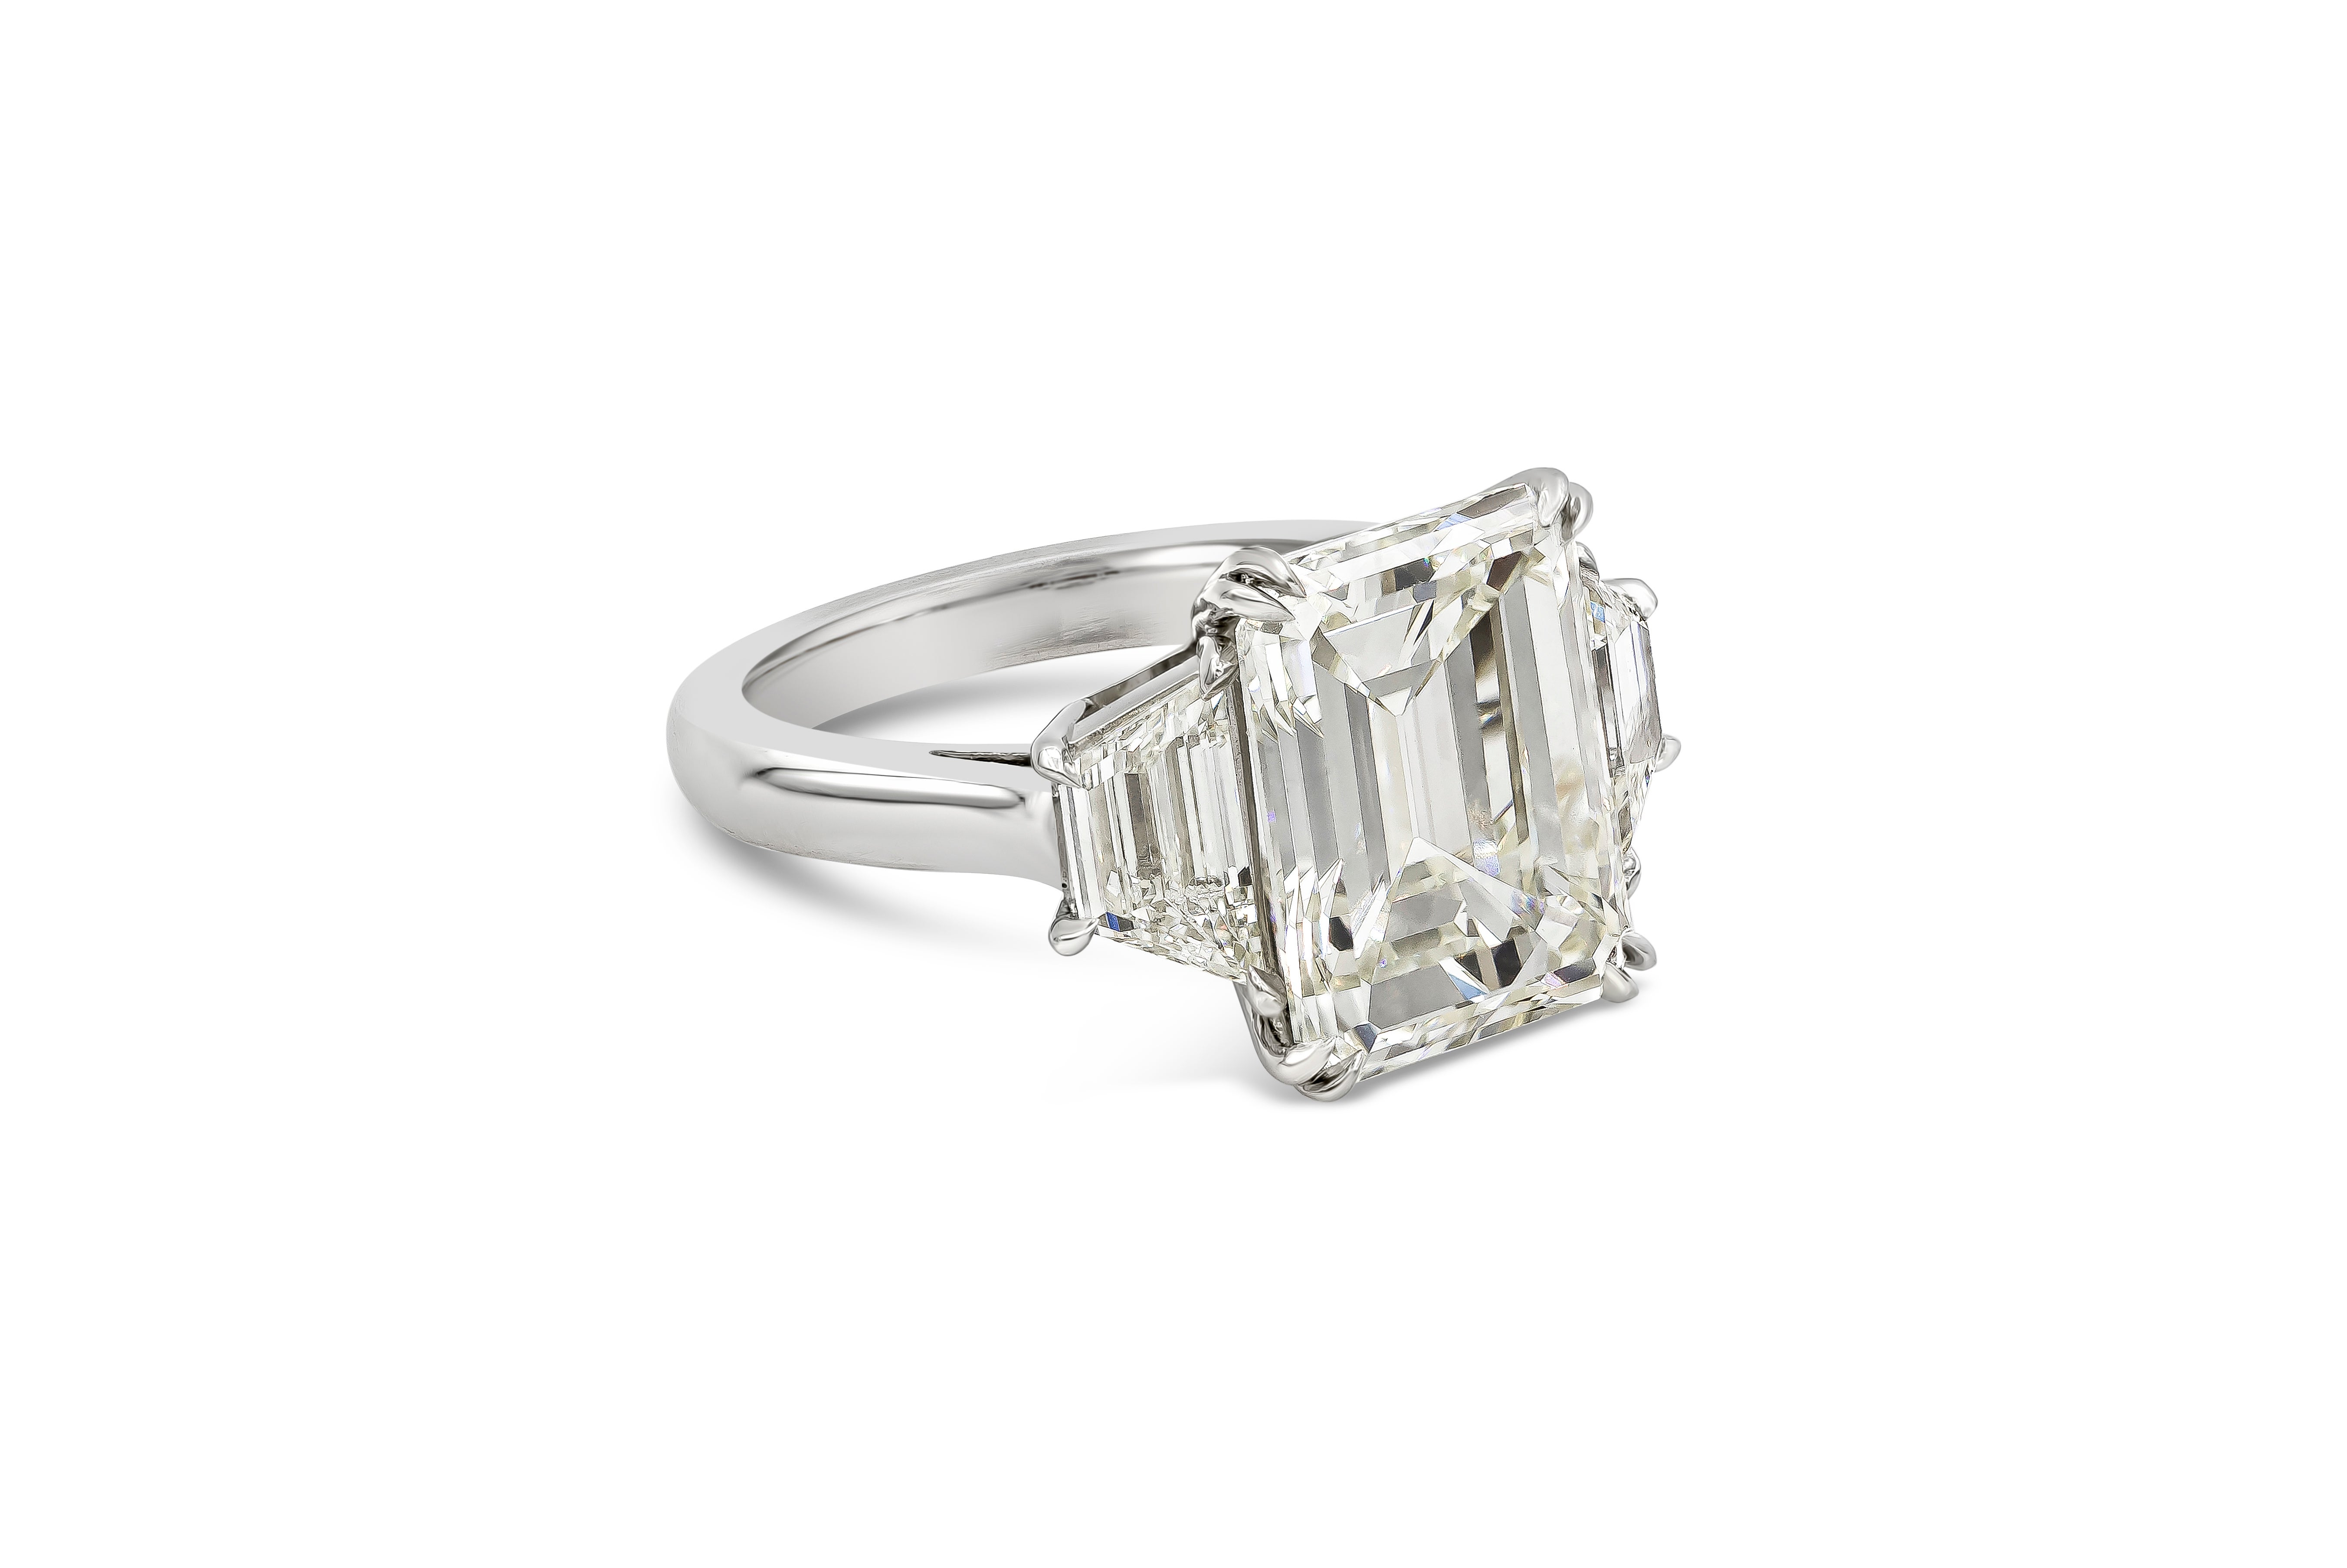 A classic and sophisticated three stone engagement ring showcasing a GIA Certified 7.31 carat emerald cut diamond, M Color and VS2 in Clarity. Flanked on each side by step-cut trapezoid diamonds weighing 1.47 carats total. Finely made with Platinum.